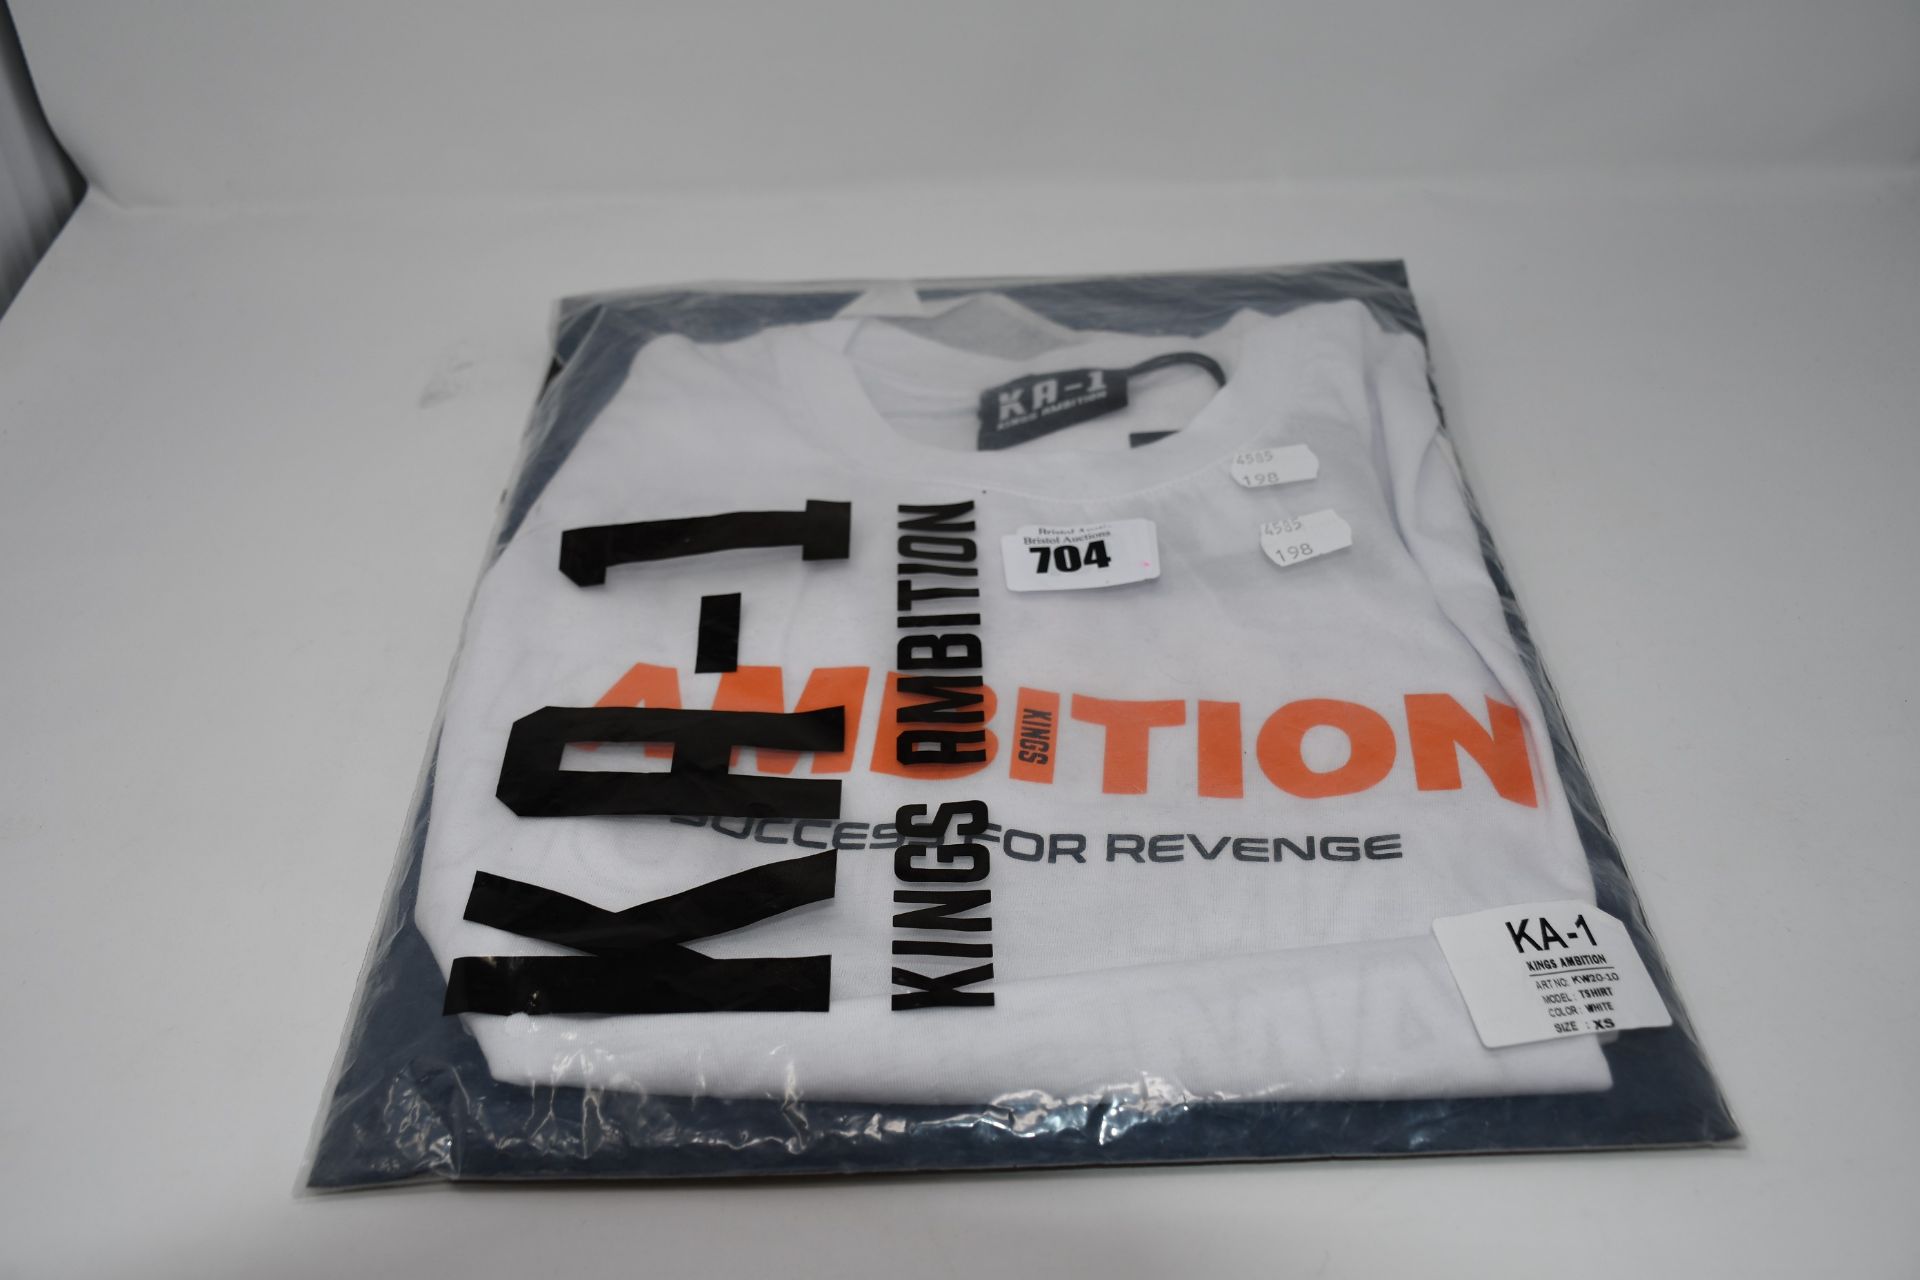 One man's as new Kings Ambition KA-1 t-shirt in white (XS, KW20-10).